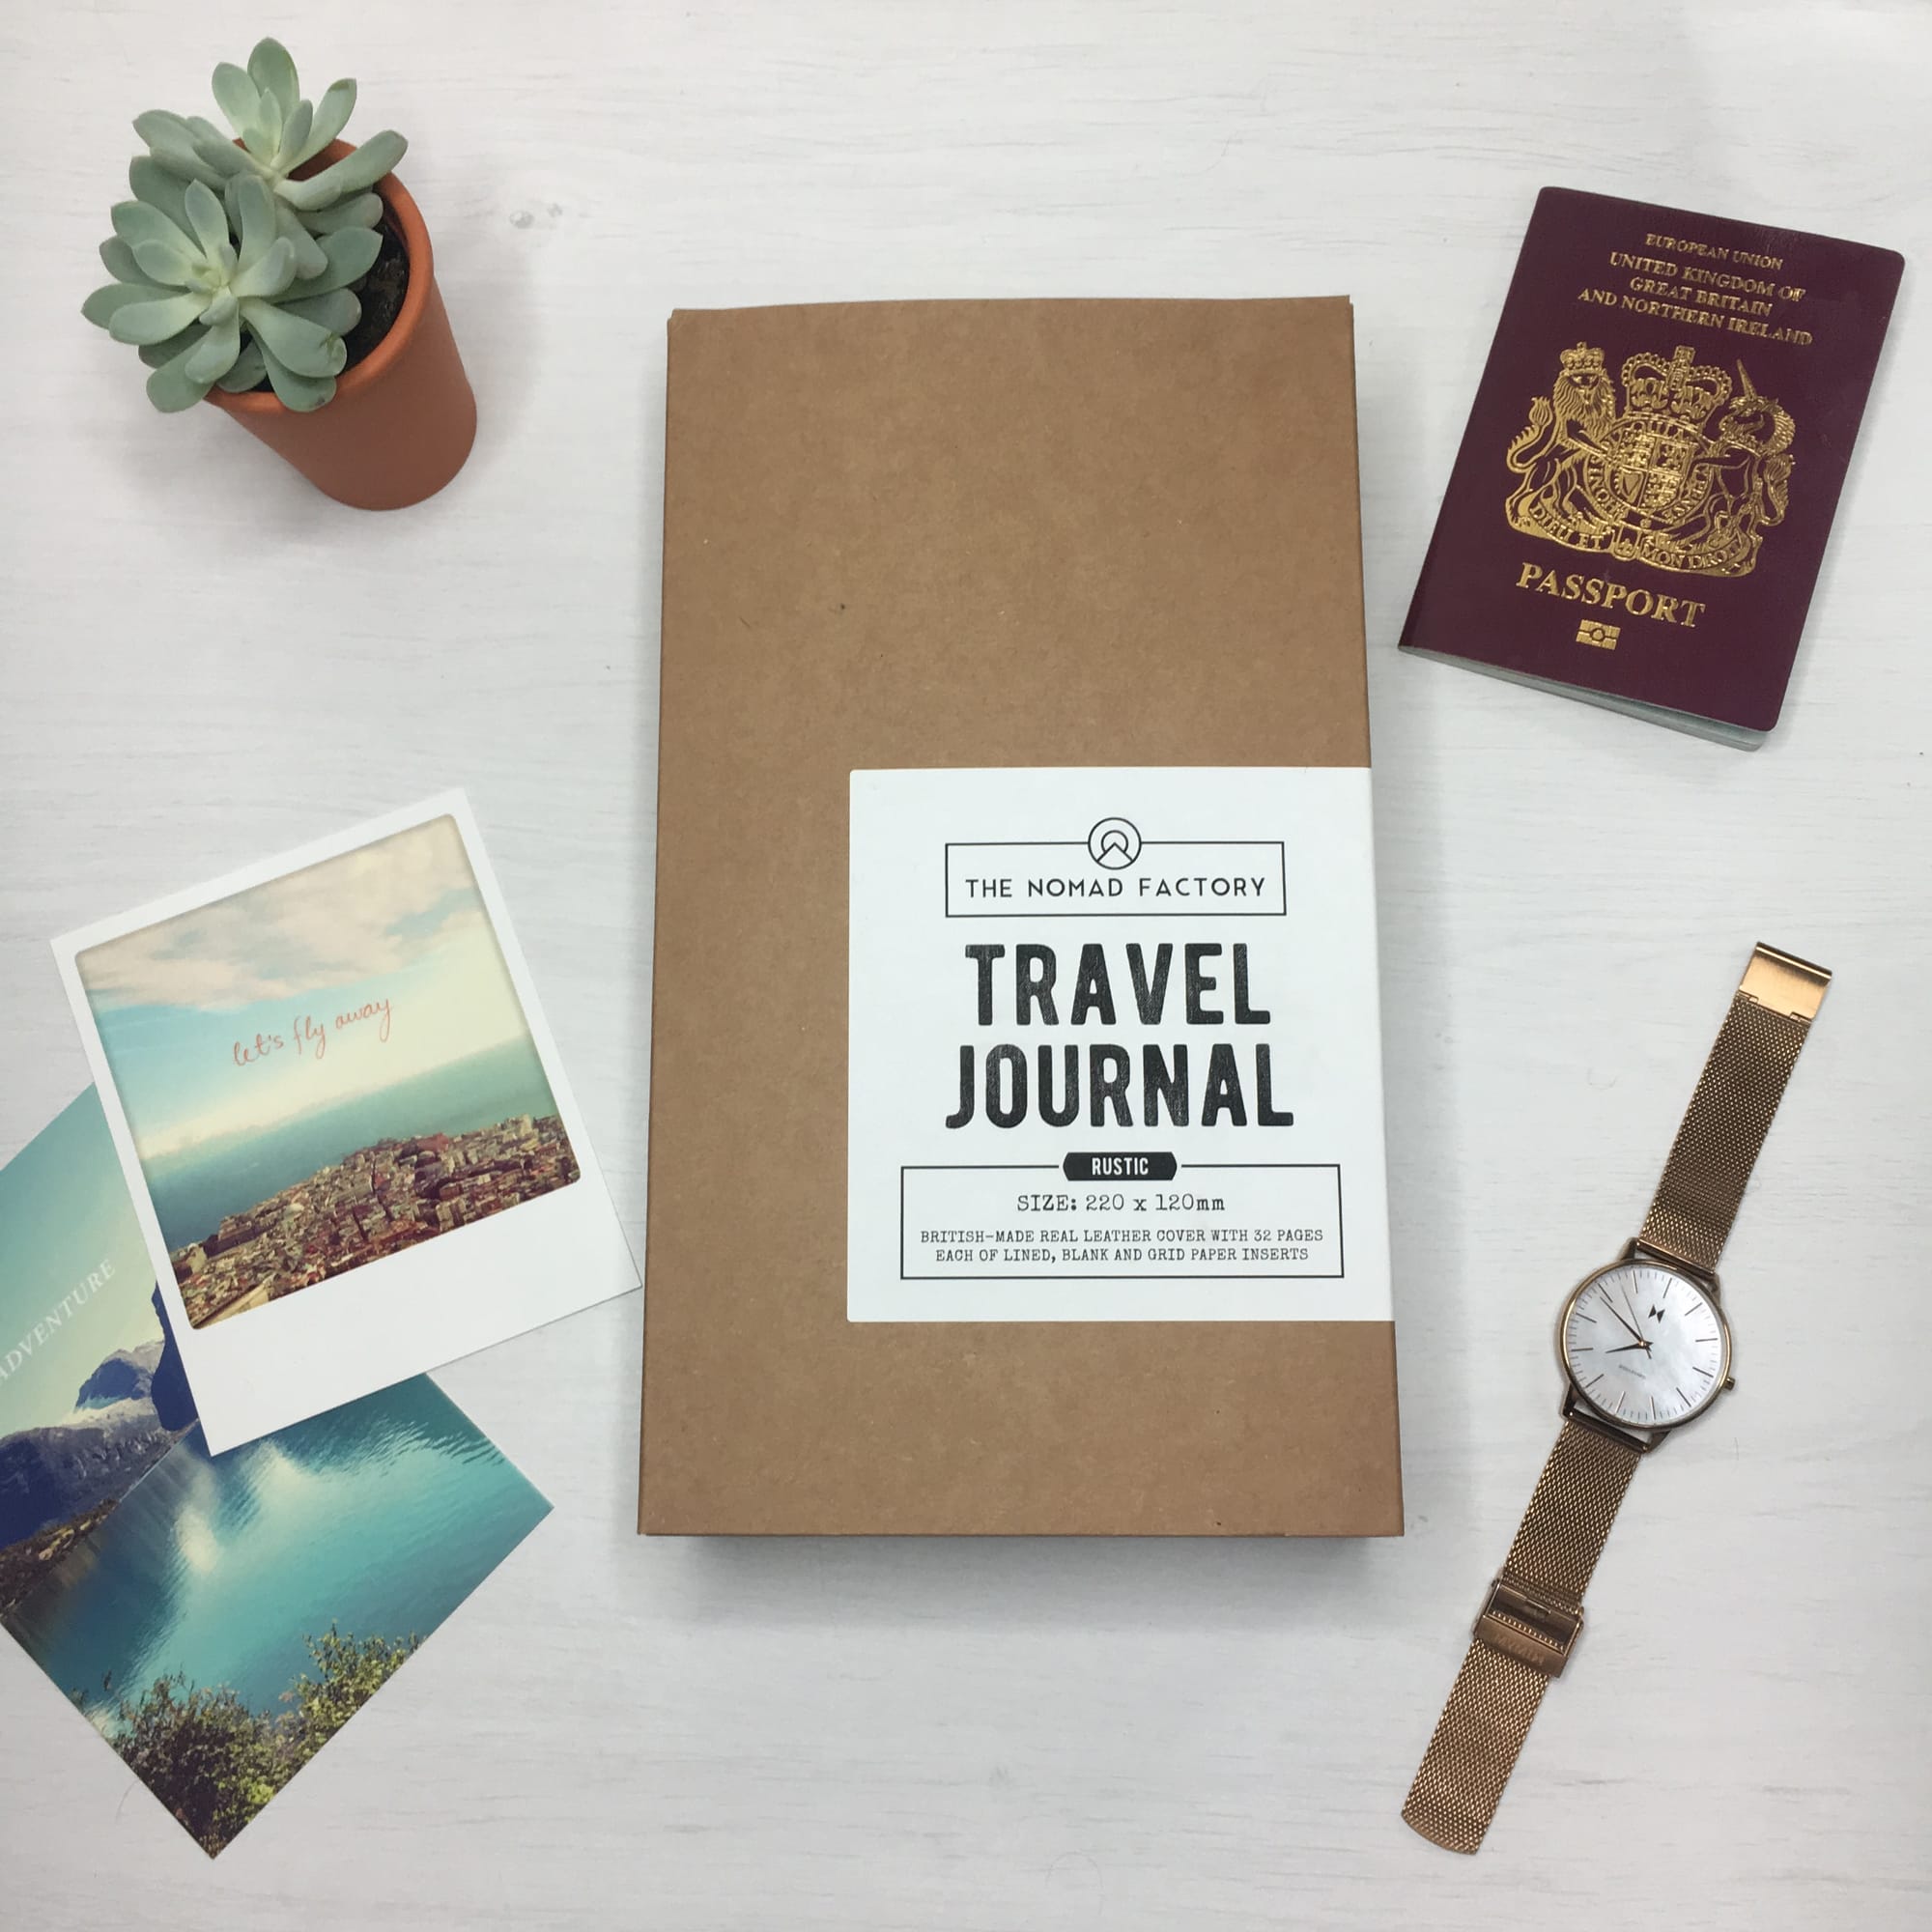 Nomad Factory Travel Journal - Miss Boux 